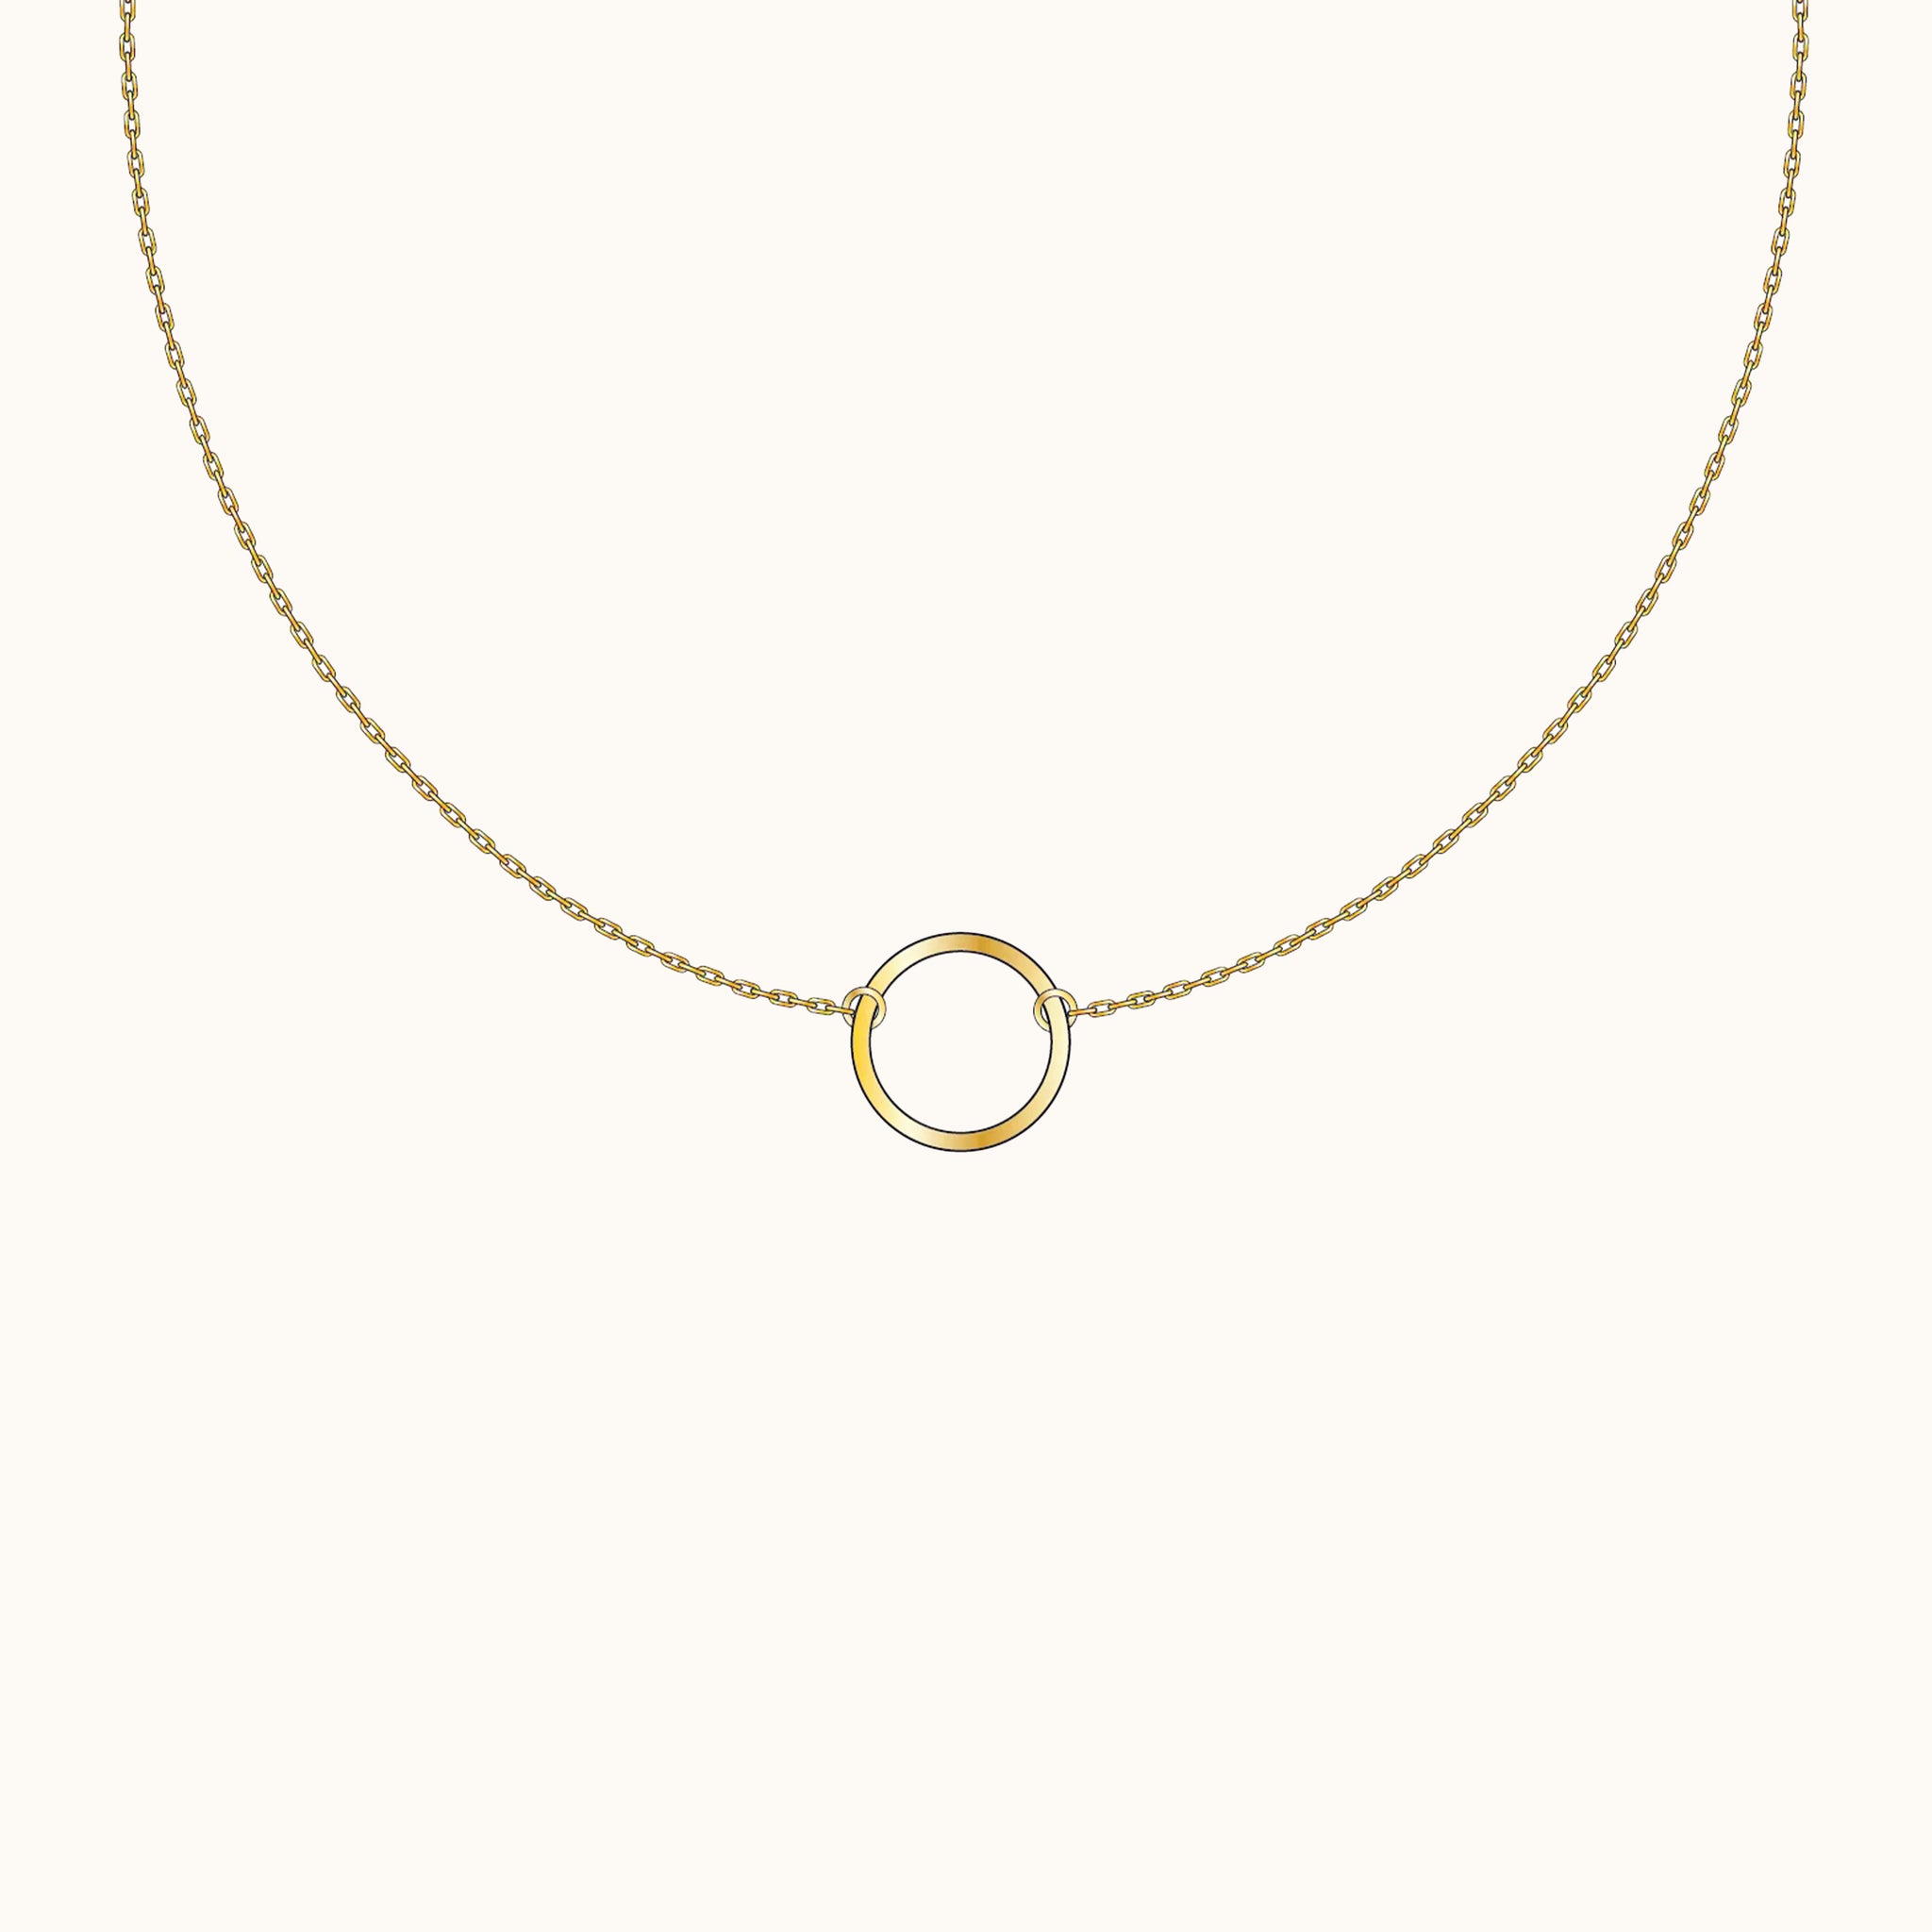 Gold Round Pendant Ring Charm Dangle Layered Dainty Circle Necklace by Doviana